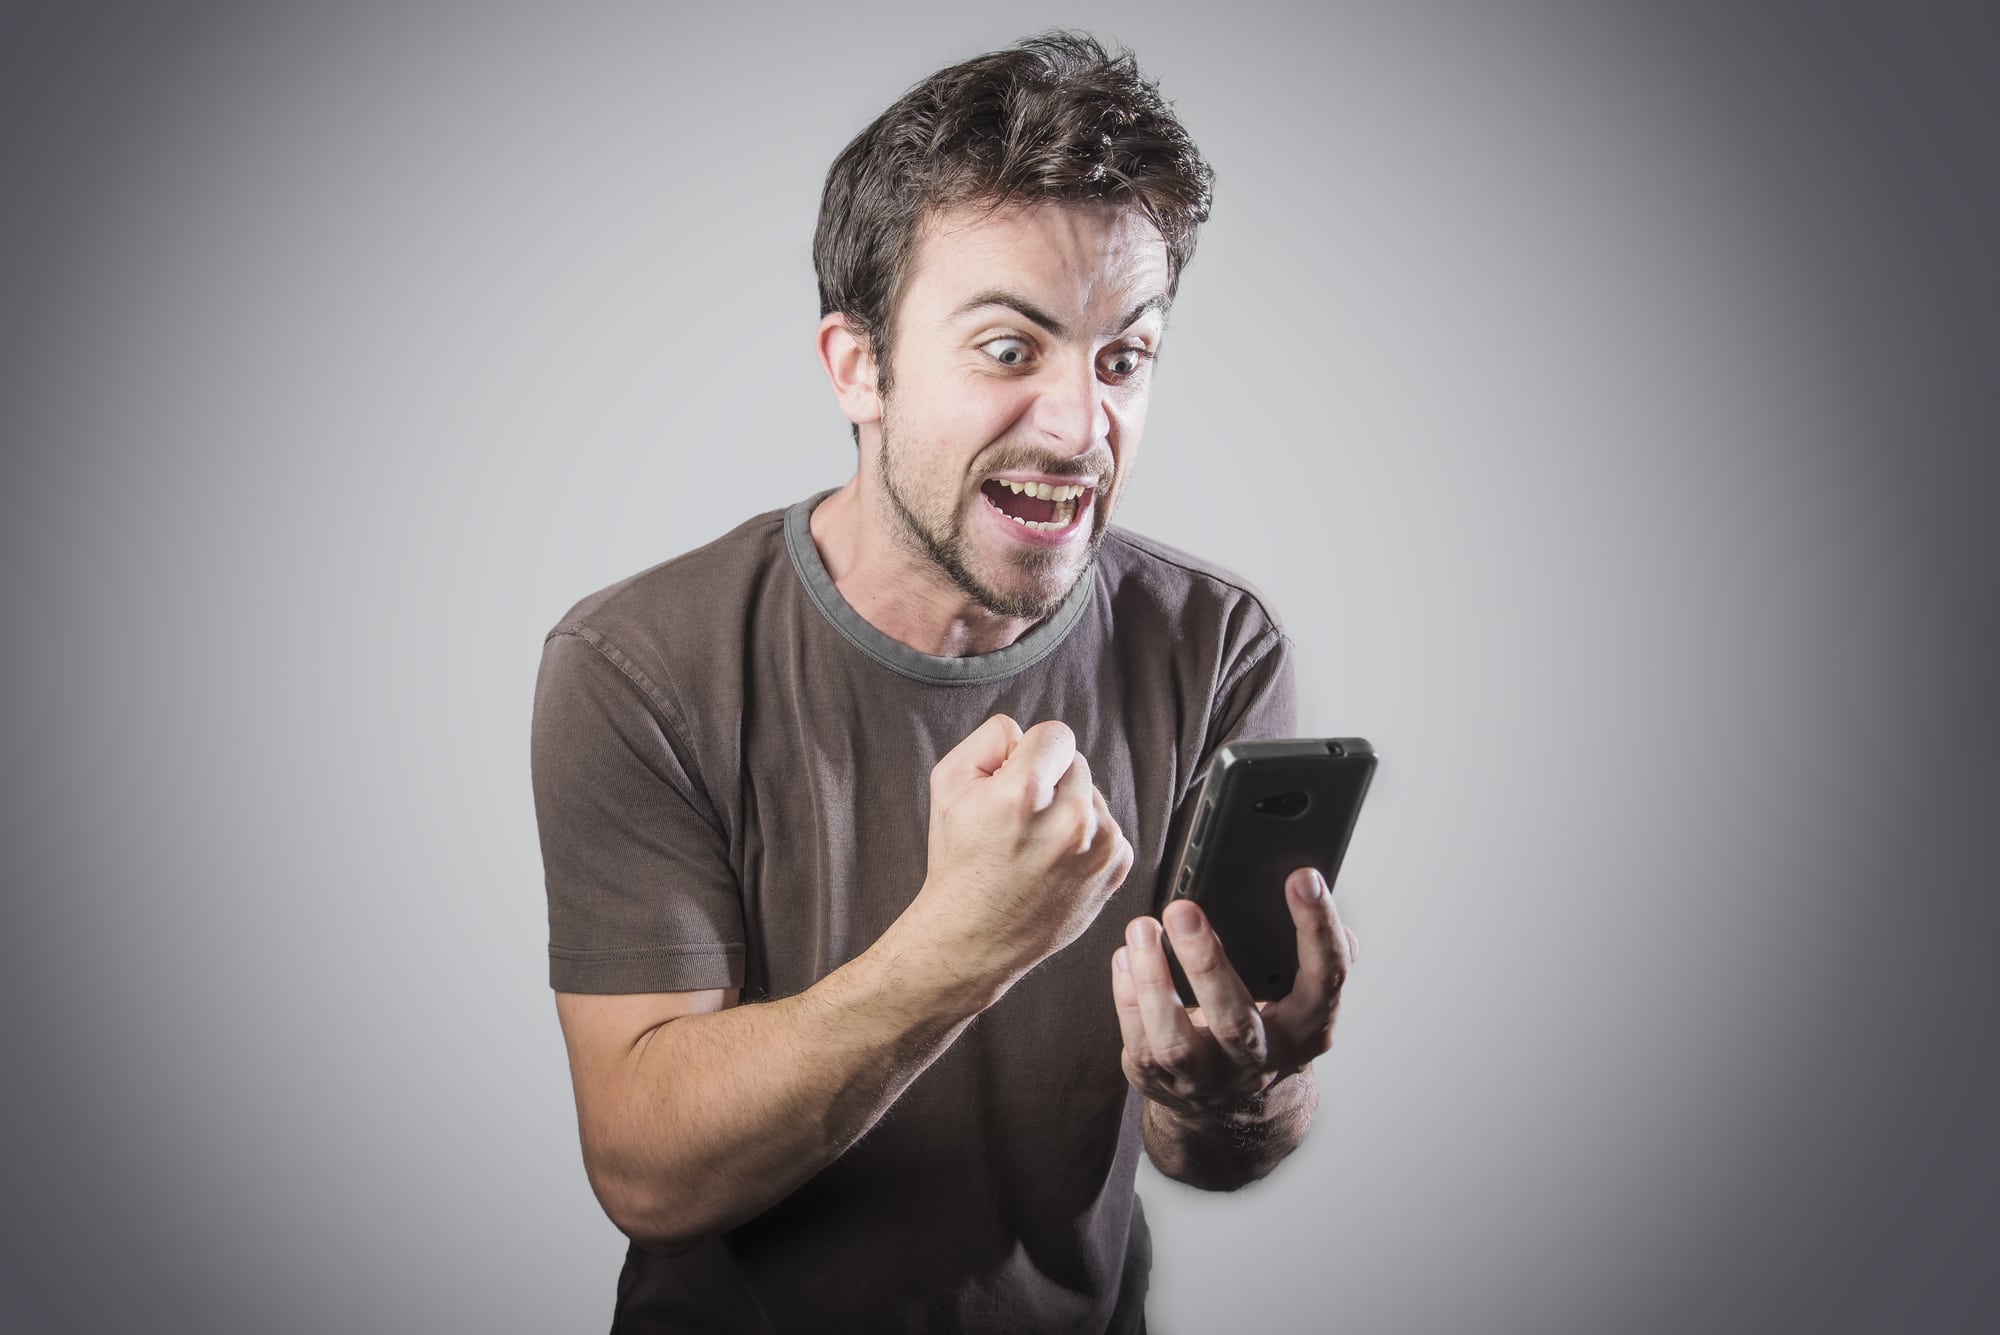 Angry man holding phone